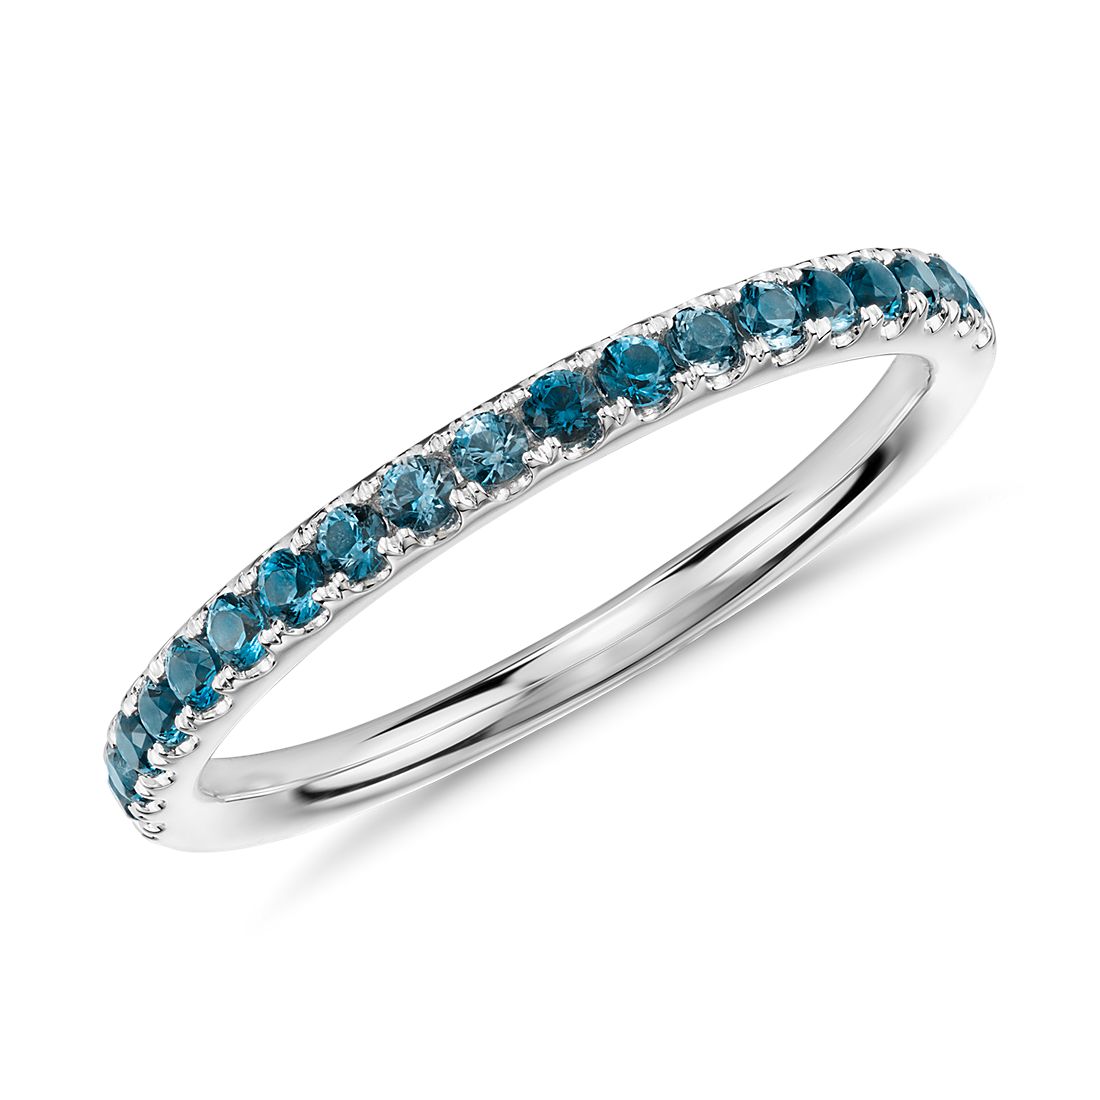 4.01 Carats Genuine Blue Topaz and White Topaz Ring Solid .925 Sterling Silver with Rhodium Plating